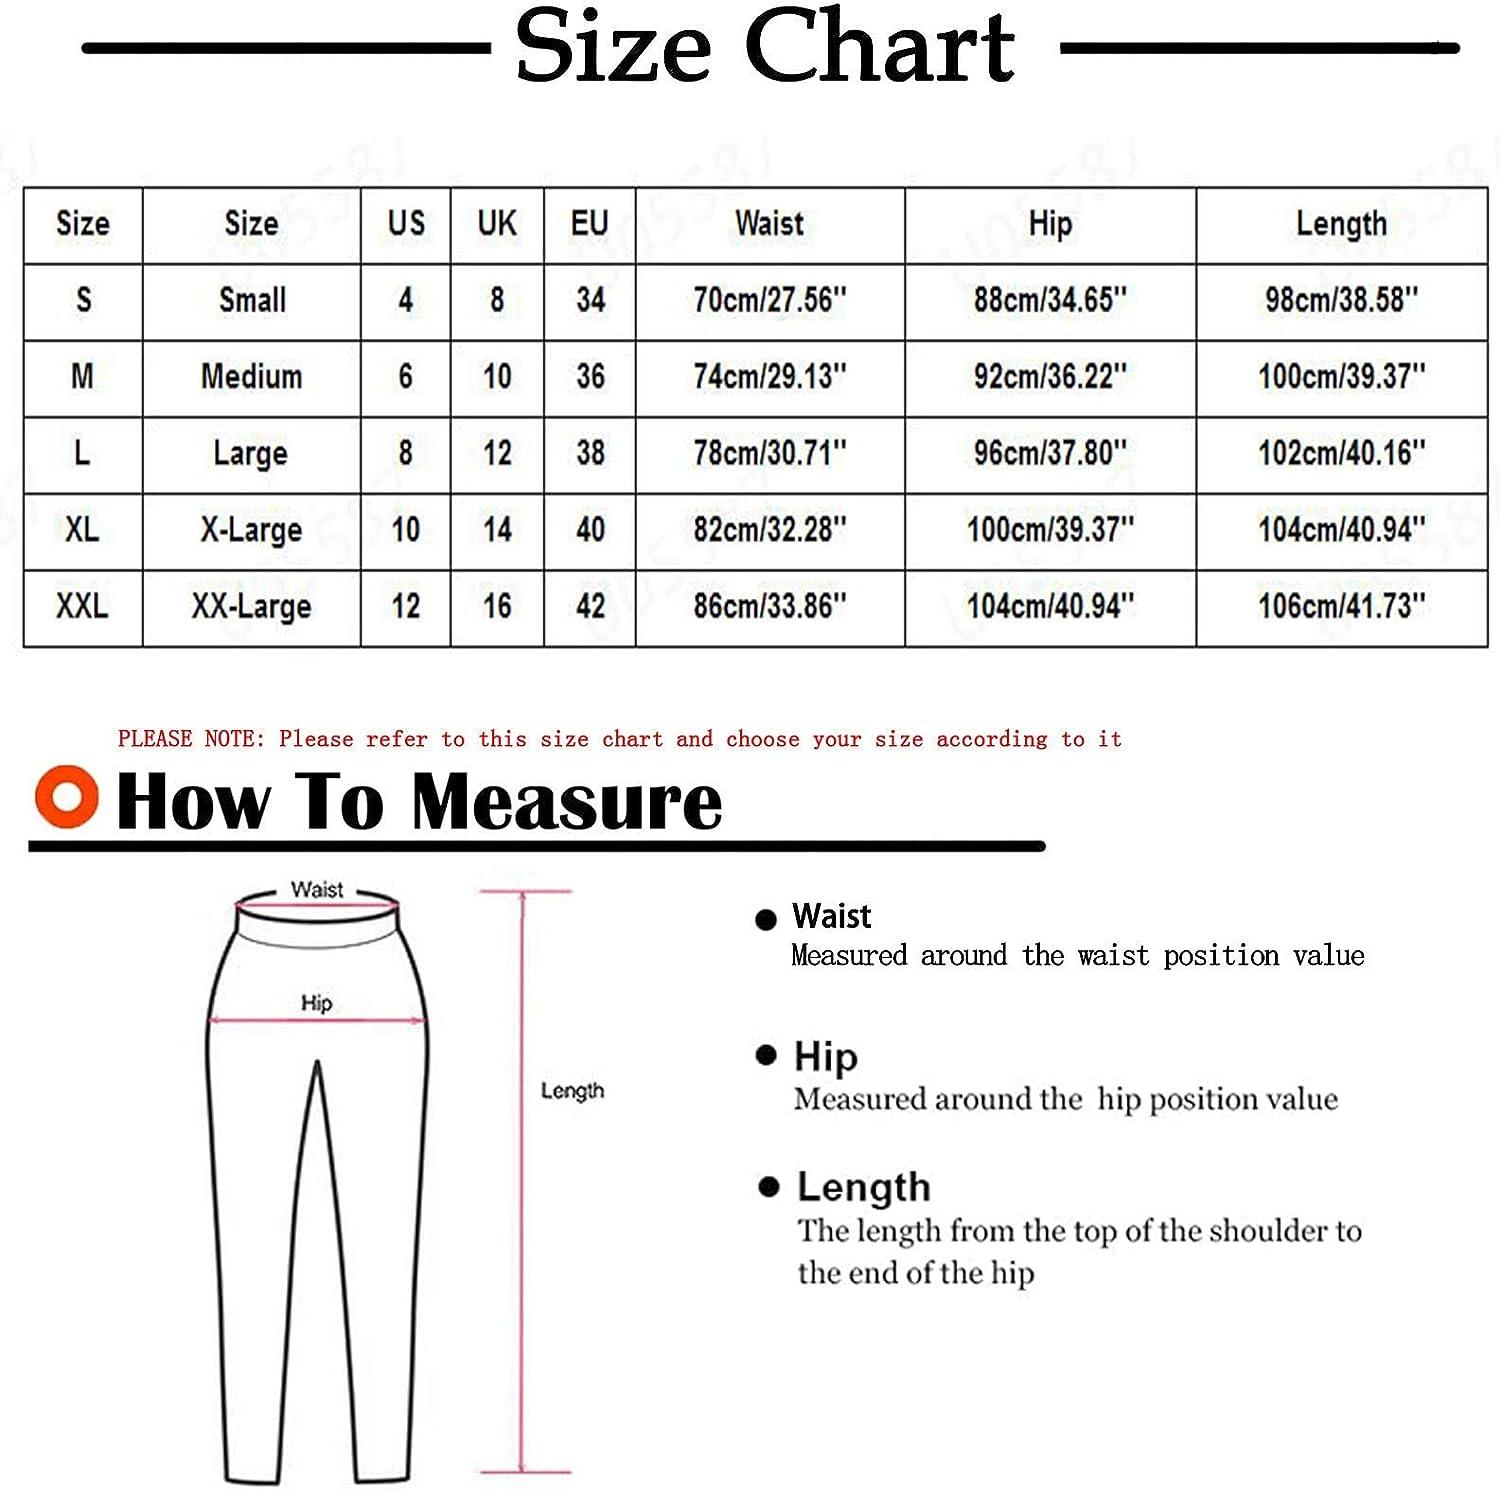 Pants Sizes for Men and Women